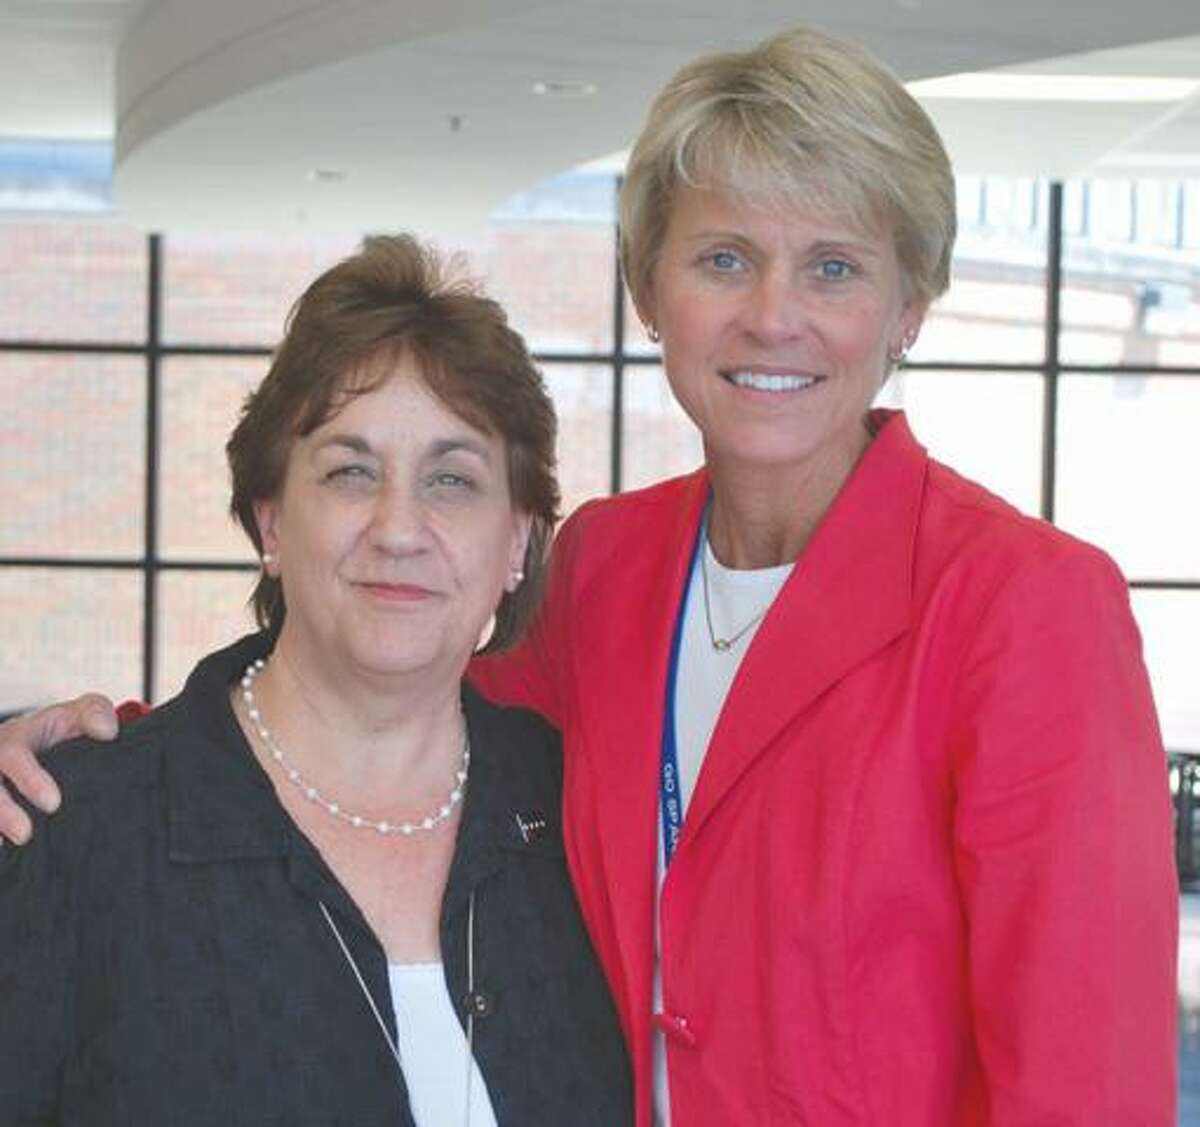 Lewis Mills' newly appointed principal Pam Lazaroski, left, and departing principal Karissa Niehoff is pictured on the right.